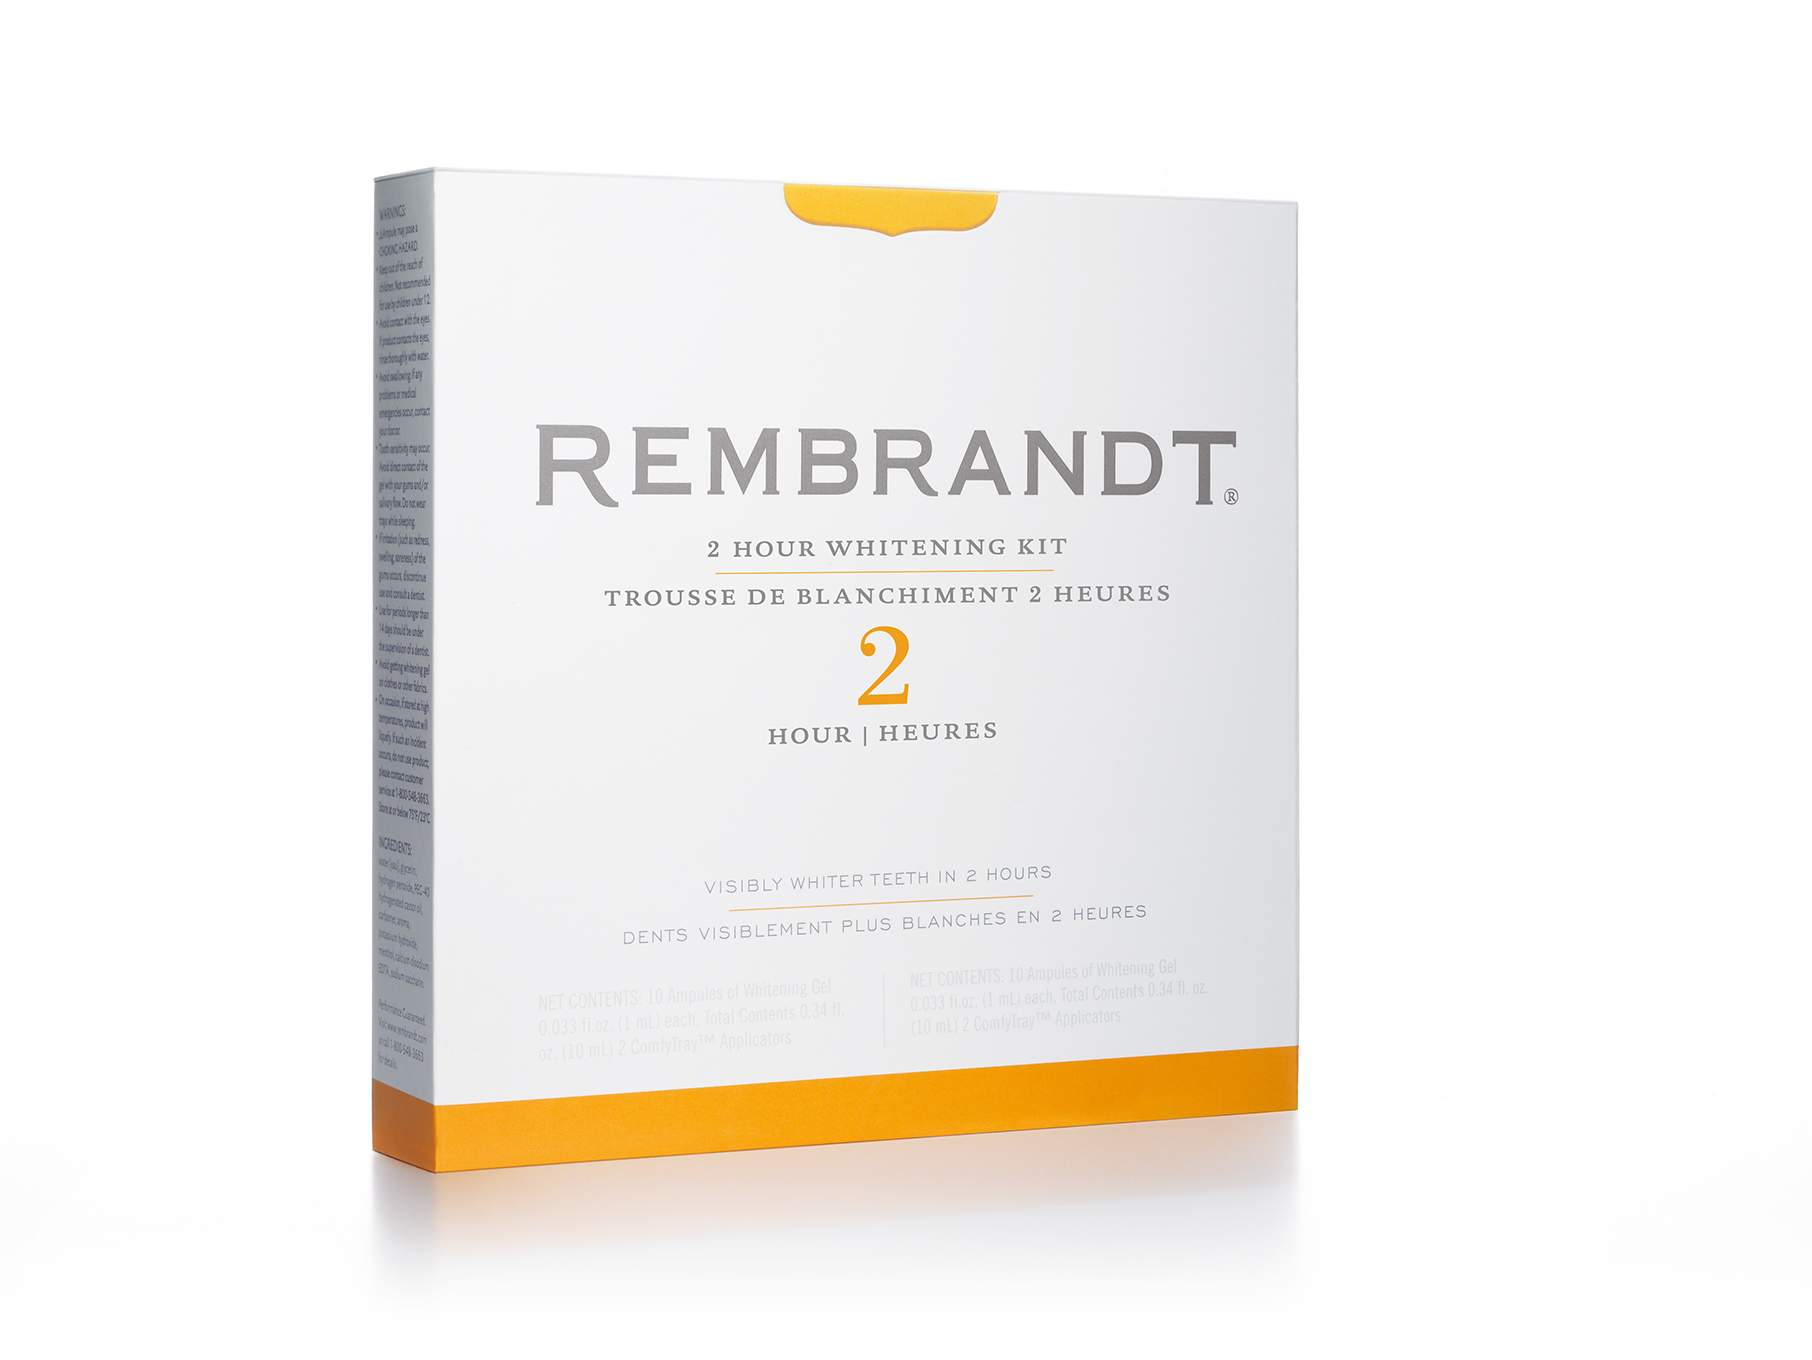 Rembrandt Whitening Prize Pack Giveaway-3 Winners!